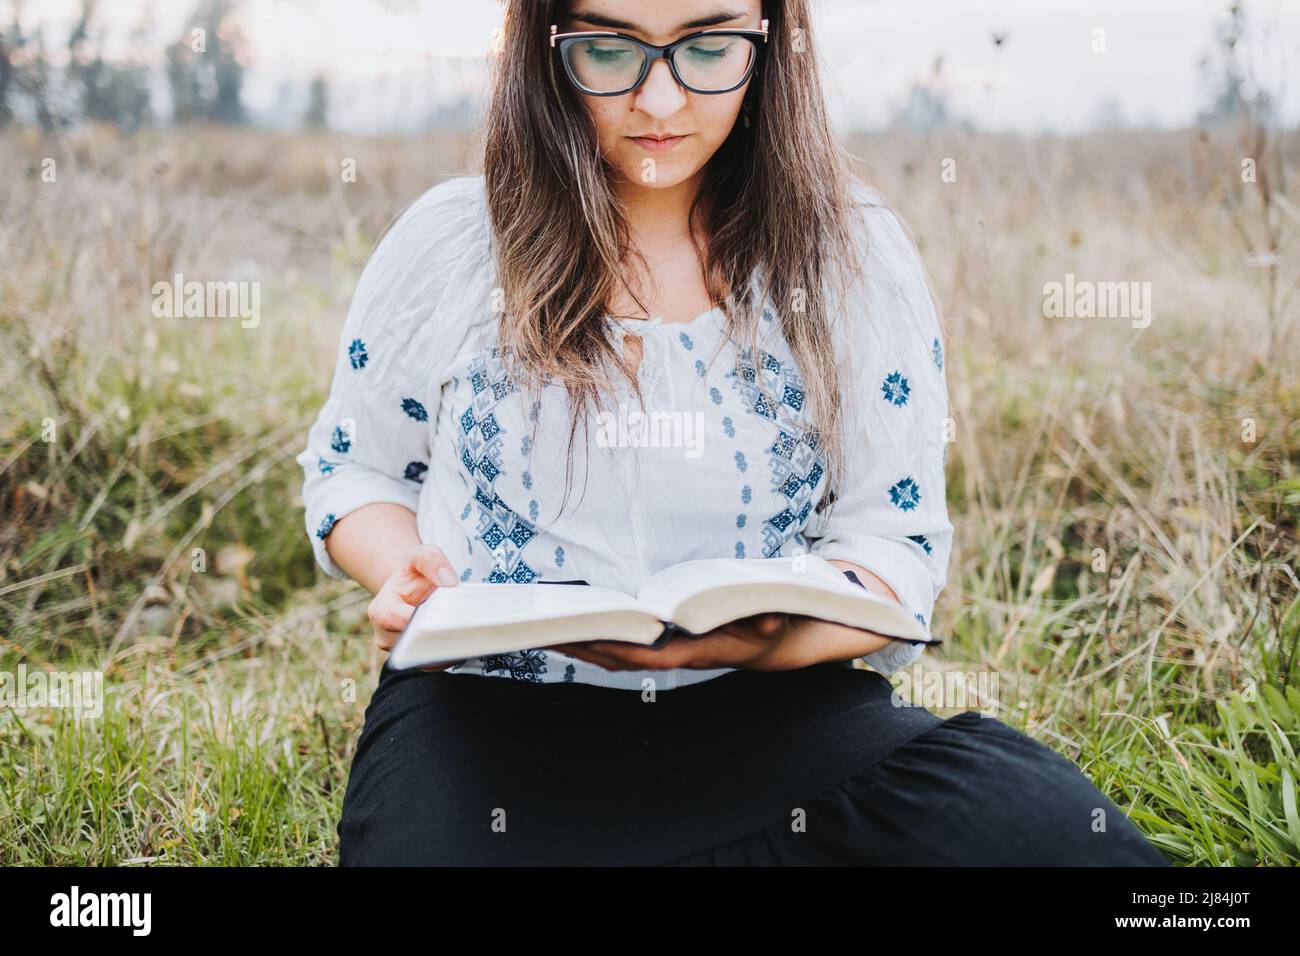 Woman with glasses sitting outdoor on the grass holding and reading an open Bible. Selective focus. Stock Photo